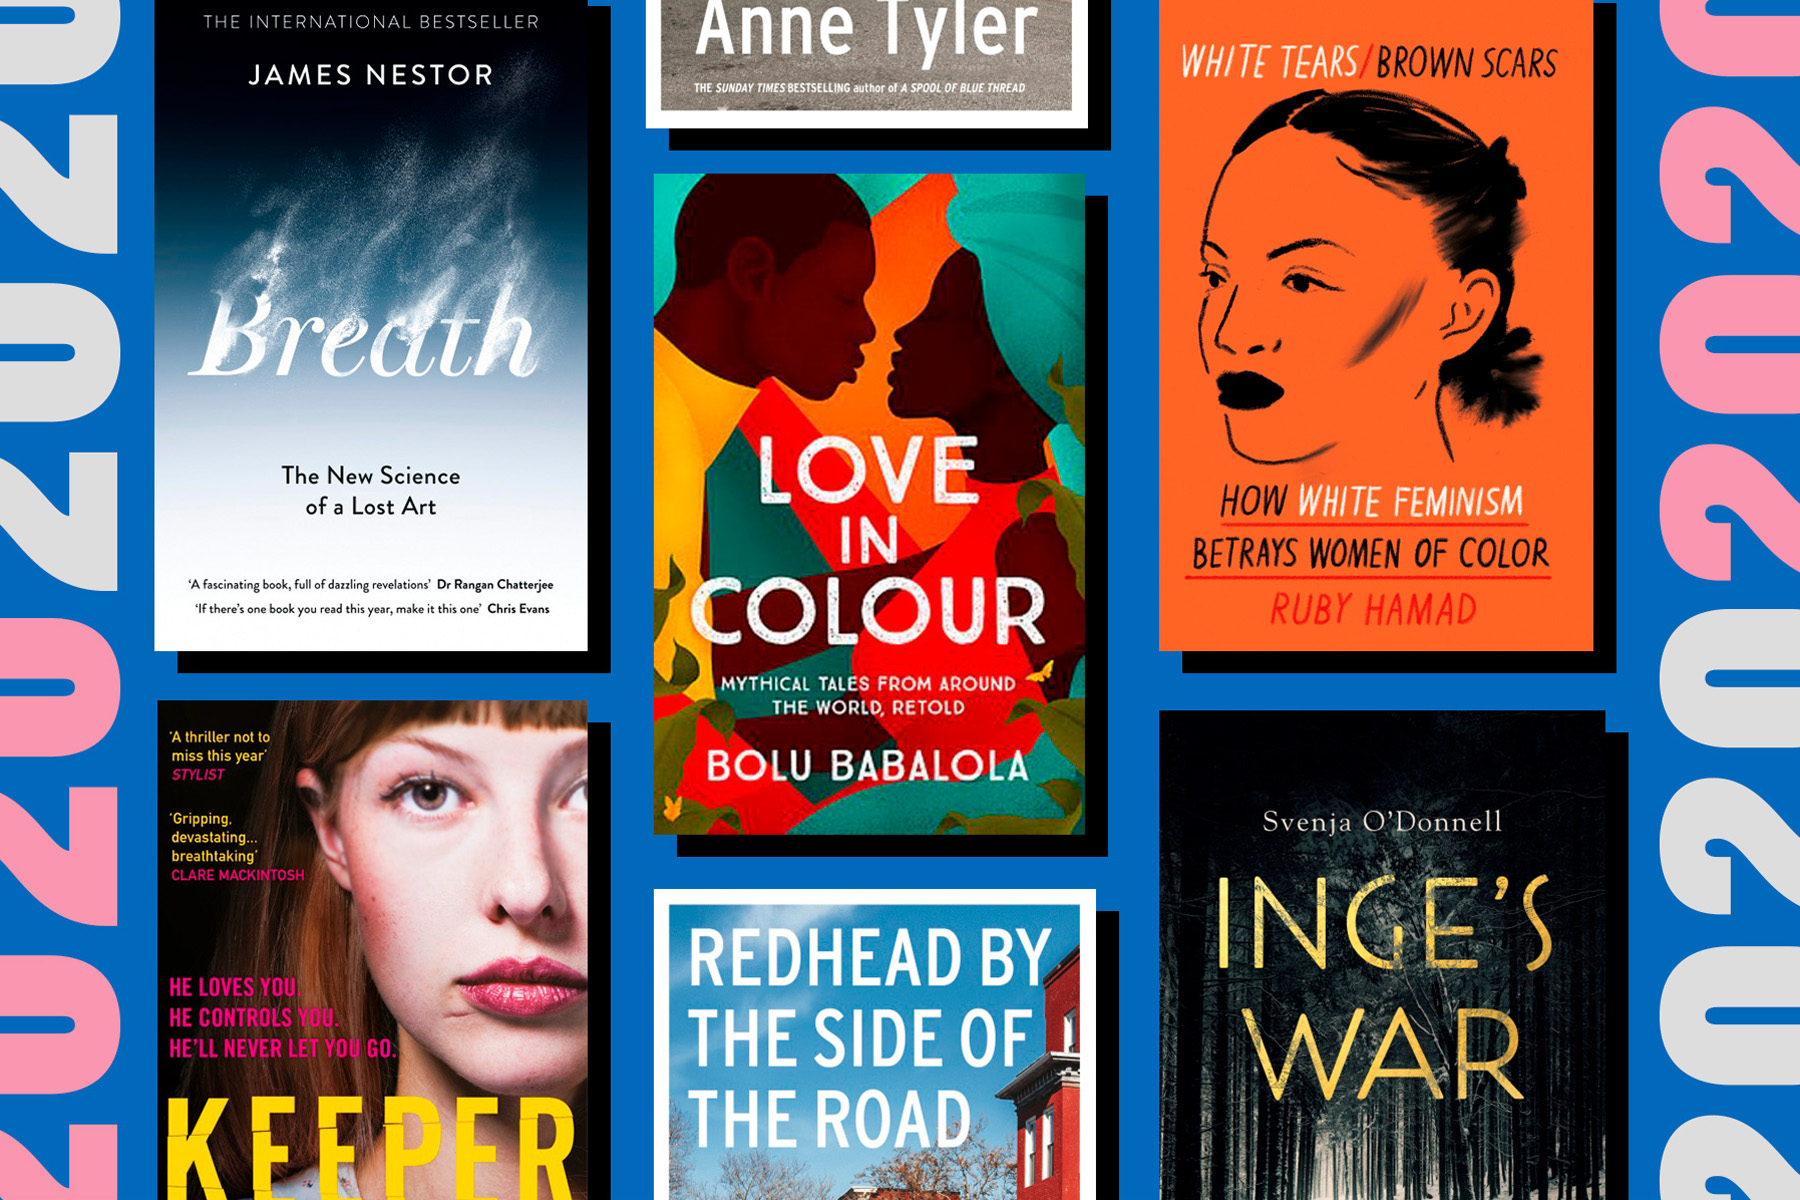 The book covers for Breath, Keeper, Love in Colour, Redhead by the Side of the Road, White Tears/Brown Scars and Inge's War on a blue background, with 2020 written down the vertical edge.